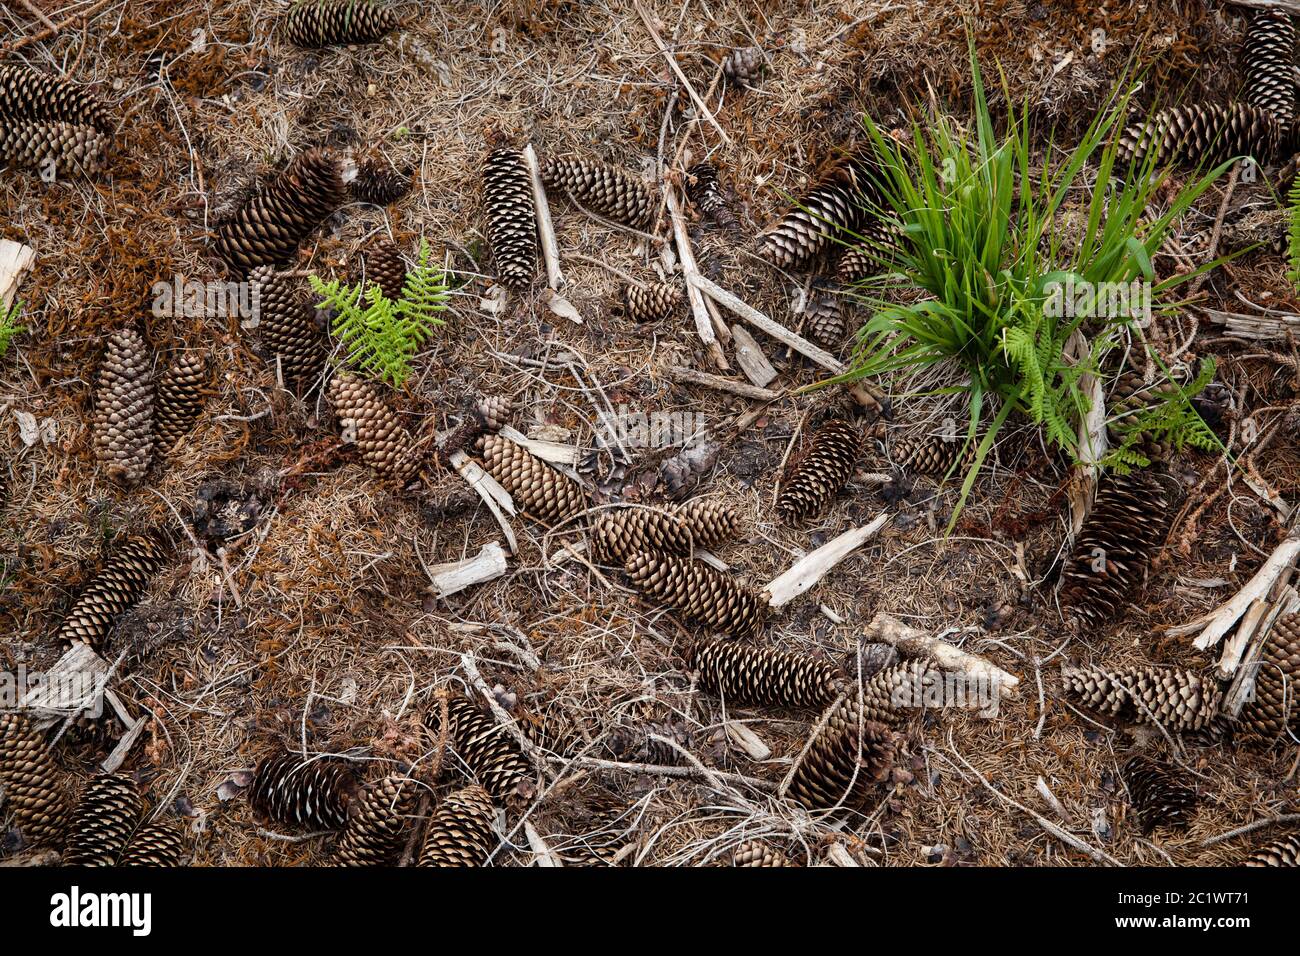 spruce cones lie on the ground of a clear cutted spruce forest in the Koenigsforest near Cologne, North Rhine-Westphalia, Germany.  Fichtenzapfen lieg Stock Photo